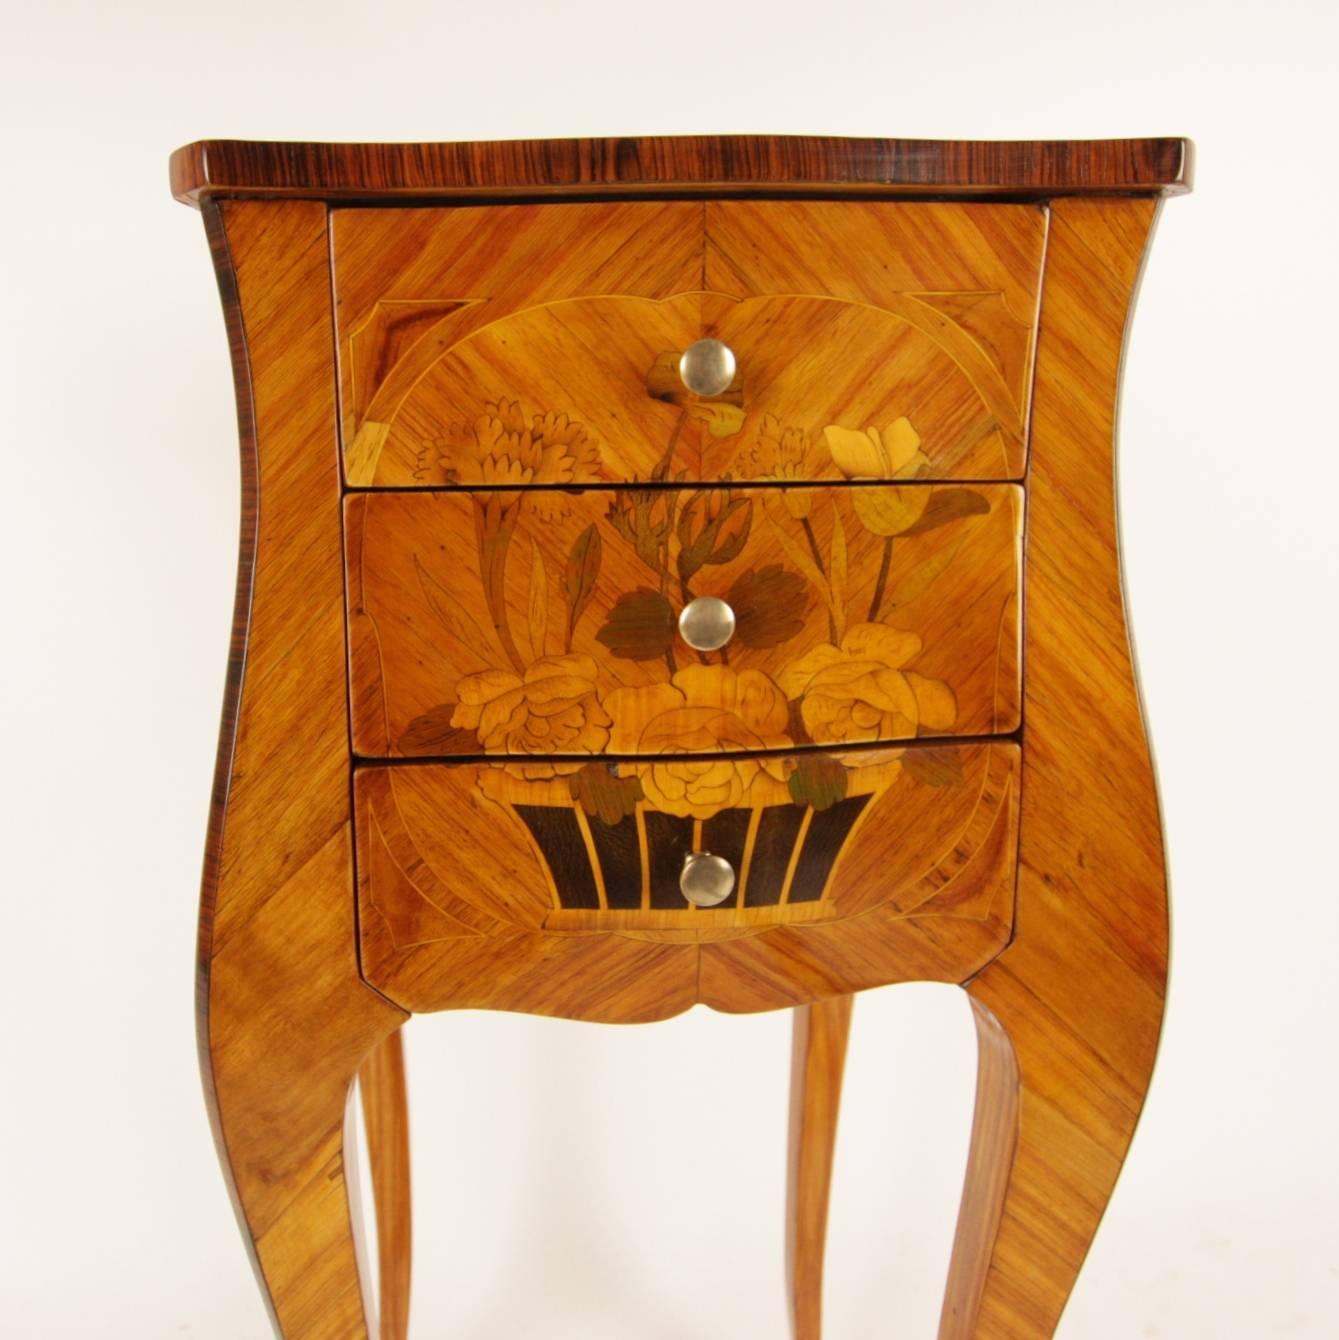 Louis XV Style Marquetry Side Table in the Manner of A. Gosselin, 1731–1794 (Französisch)